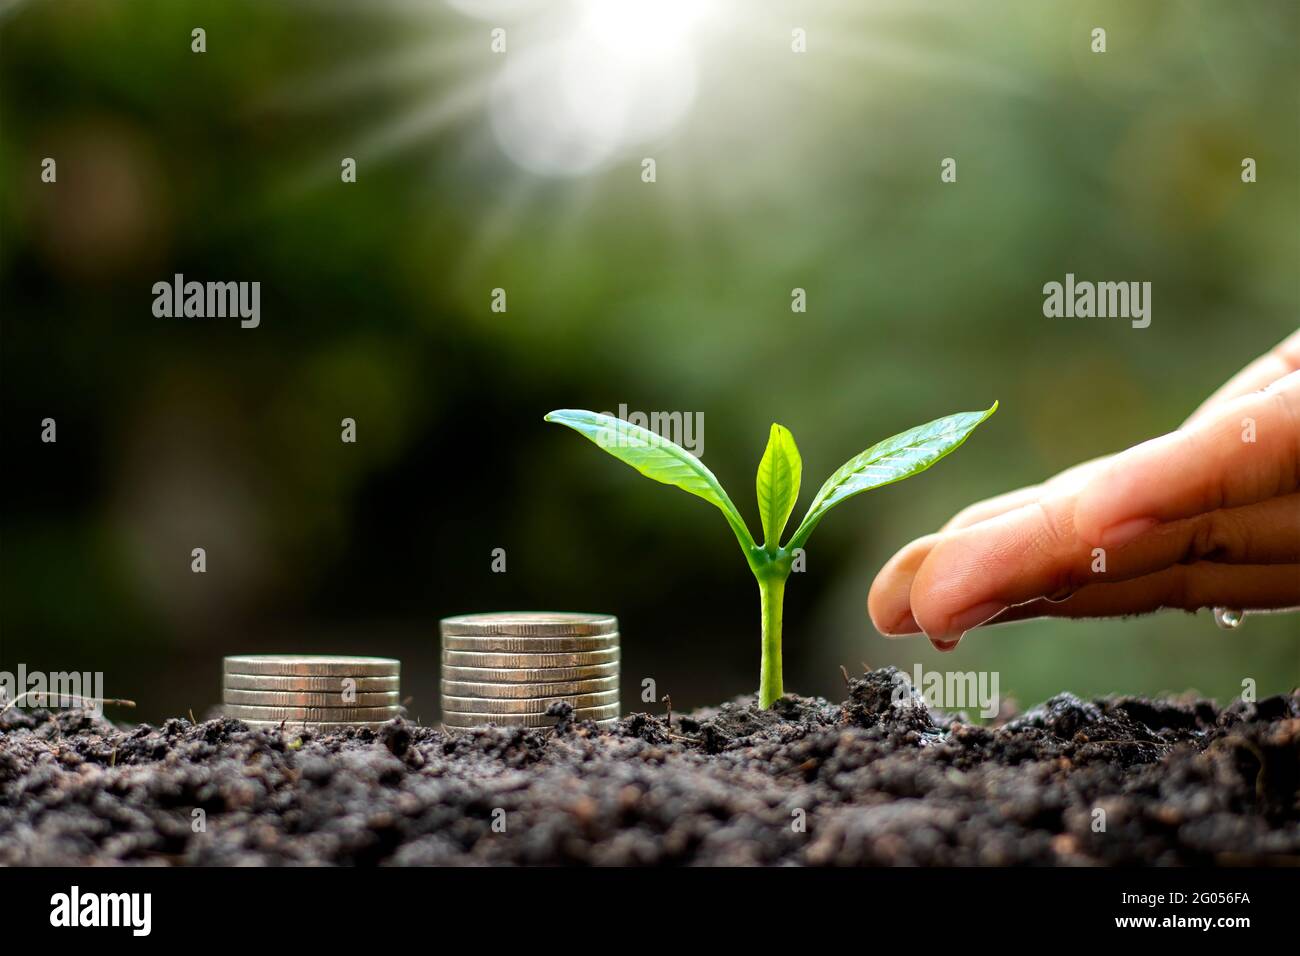 Hands are watering plants growing on the ground and stacked coins, financial and business success ideas. Stock Photo